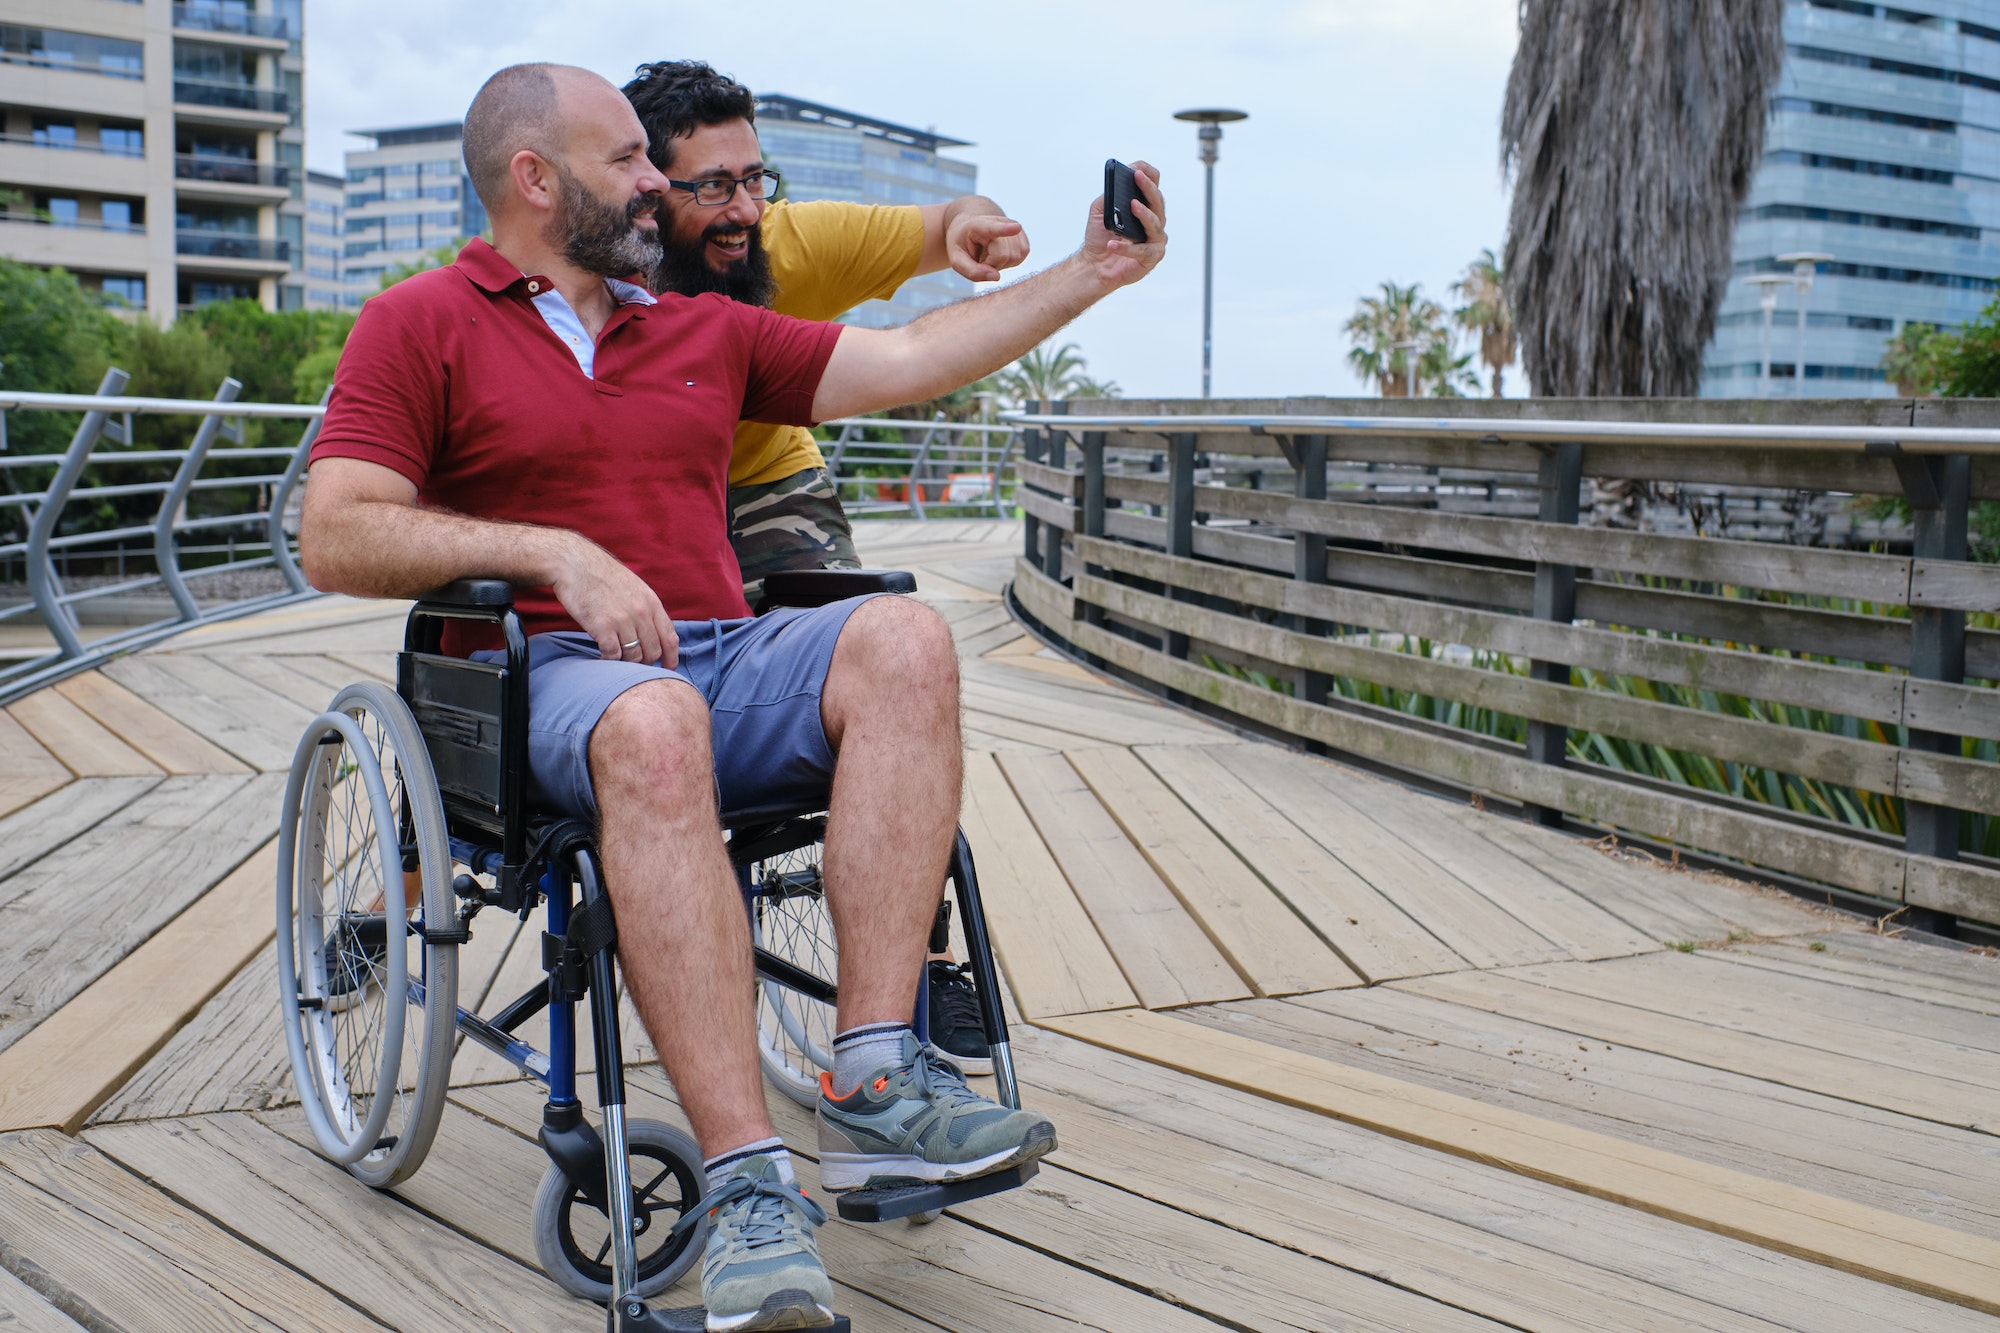 Carer Pushing Senior Man In Wheelchair - people with disabilites concept